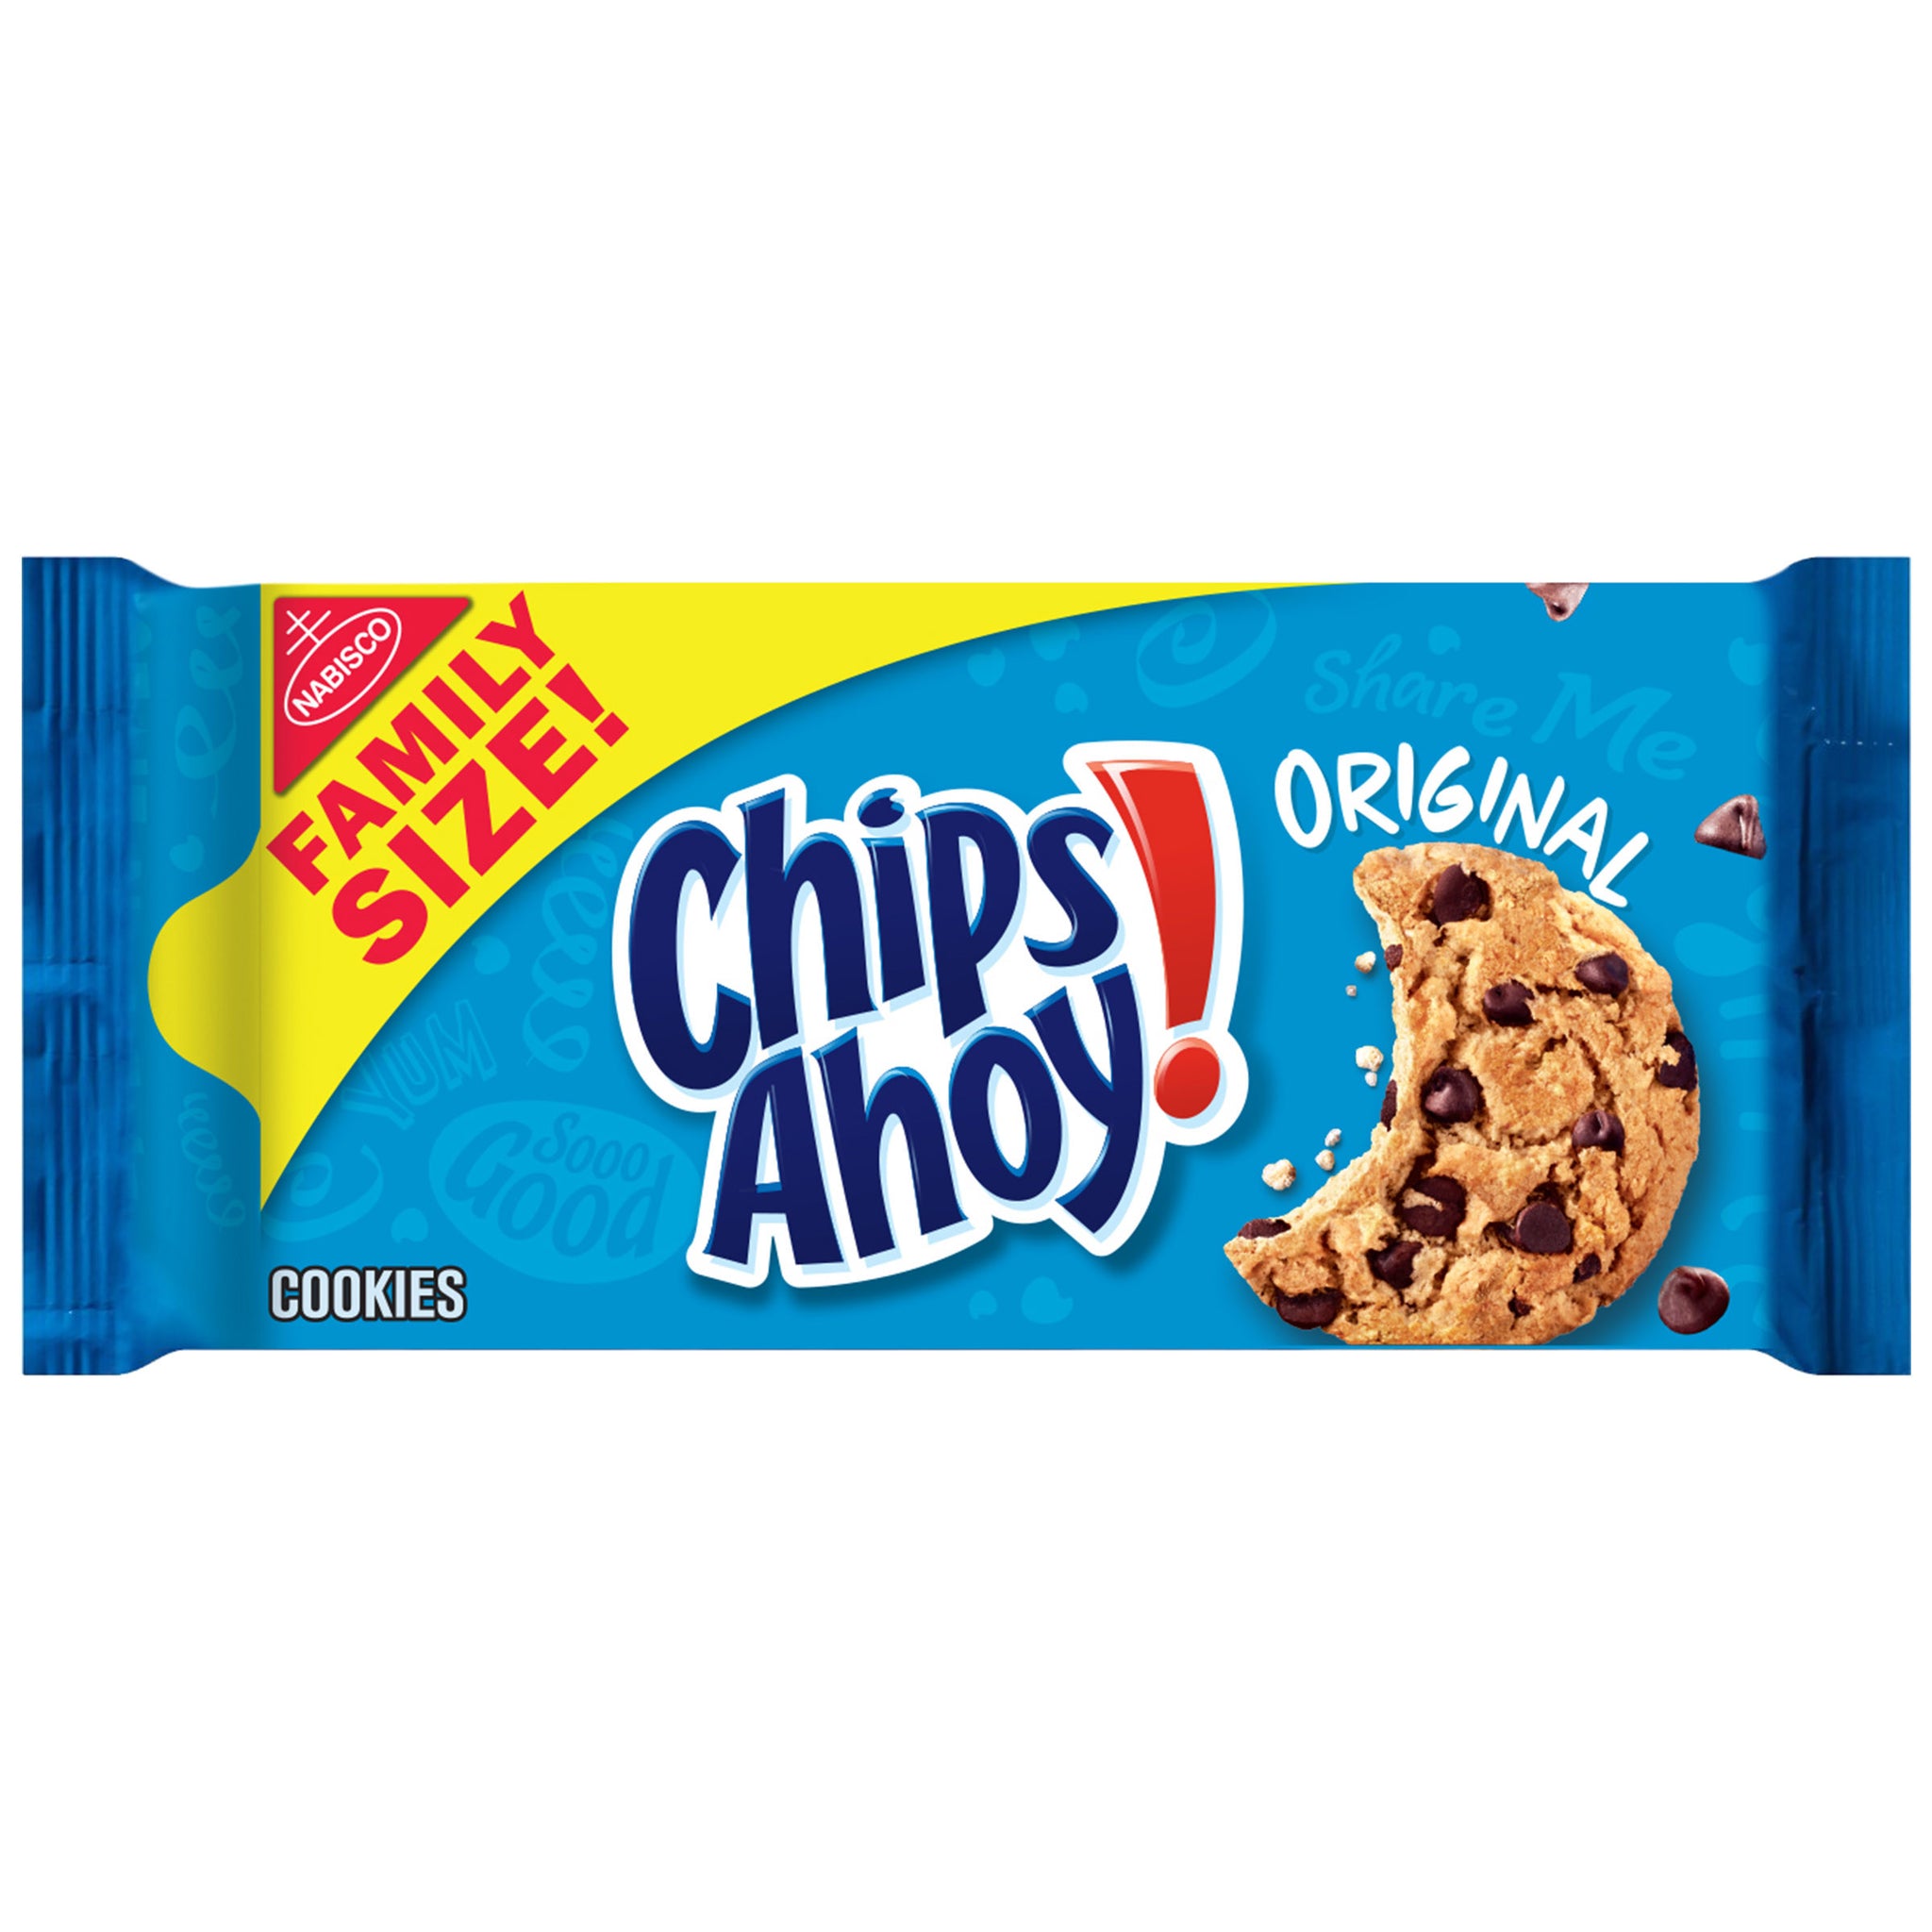 CHIPS AHOY! Original Chocolate Chip Cookies, Family Size